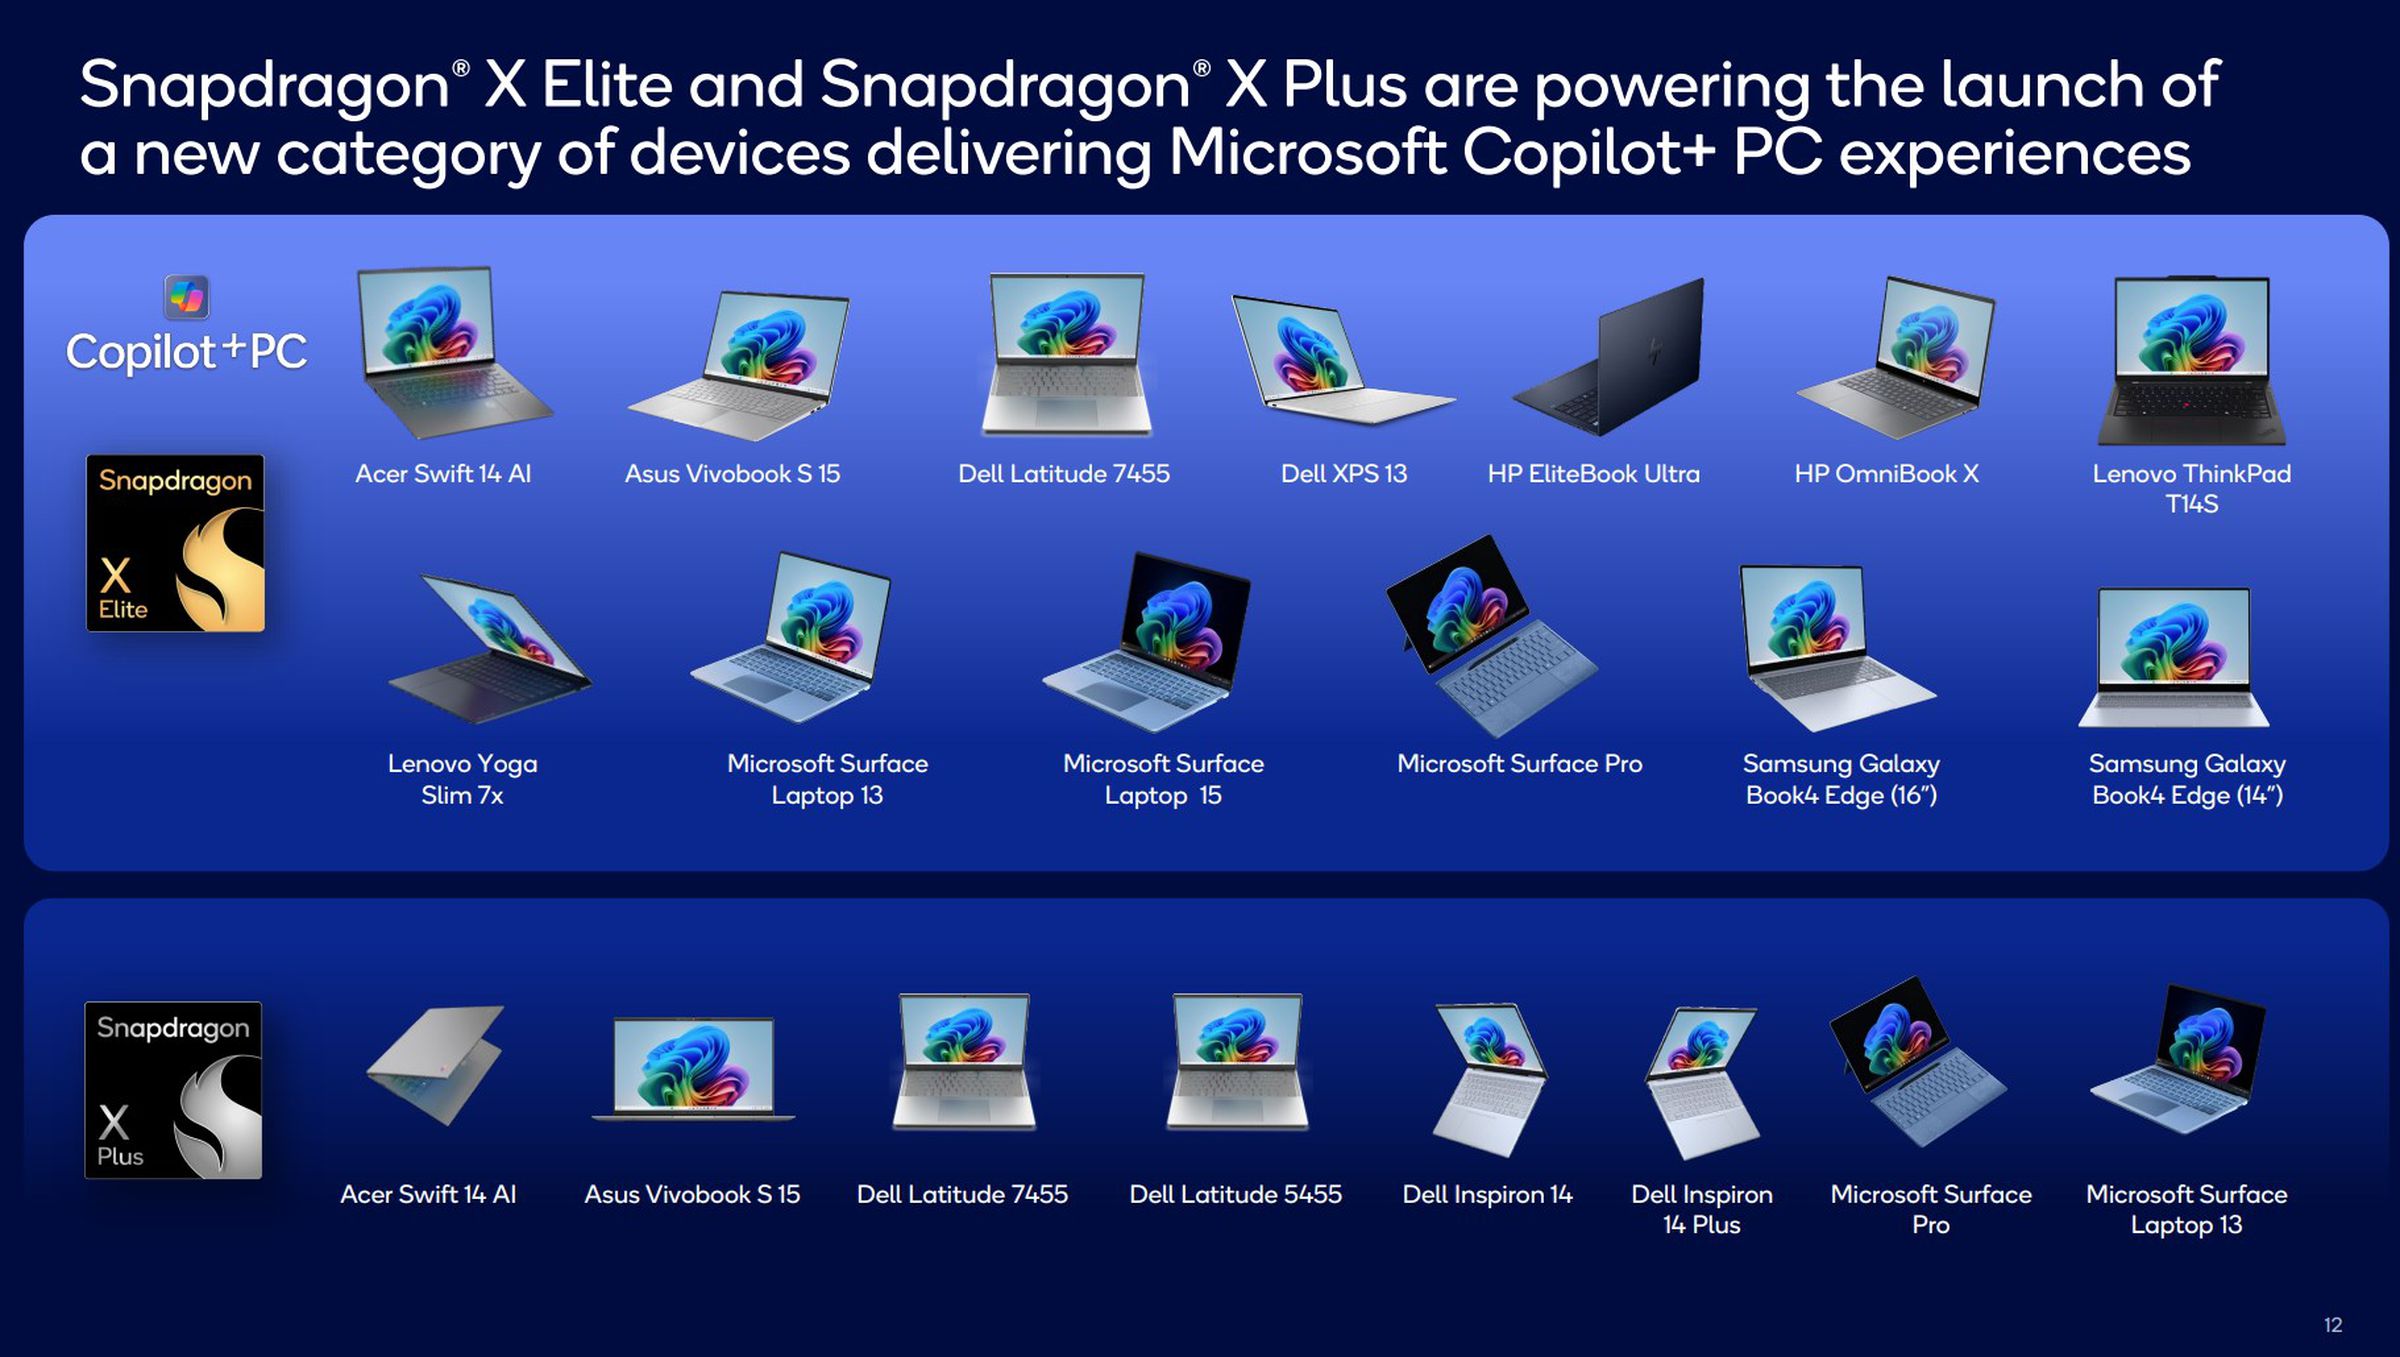 Qualcomm’s current Snapdragon laptop lineup and its various partners.